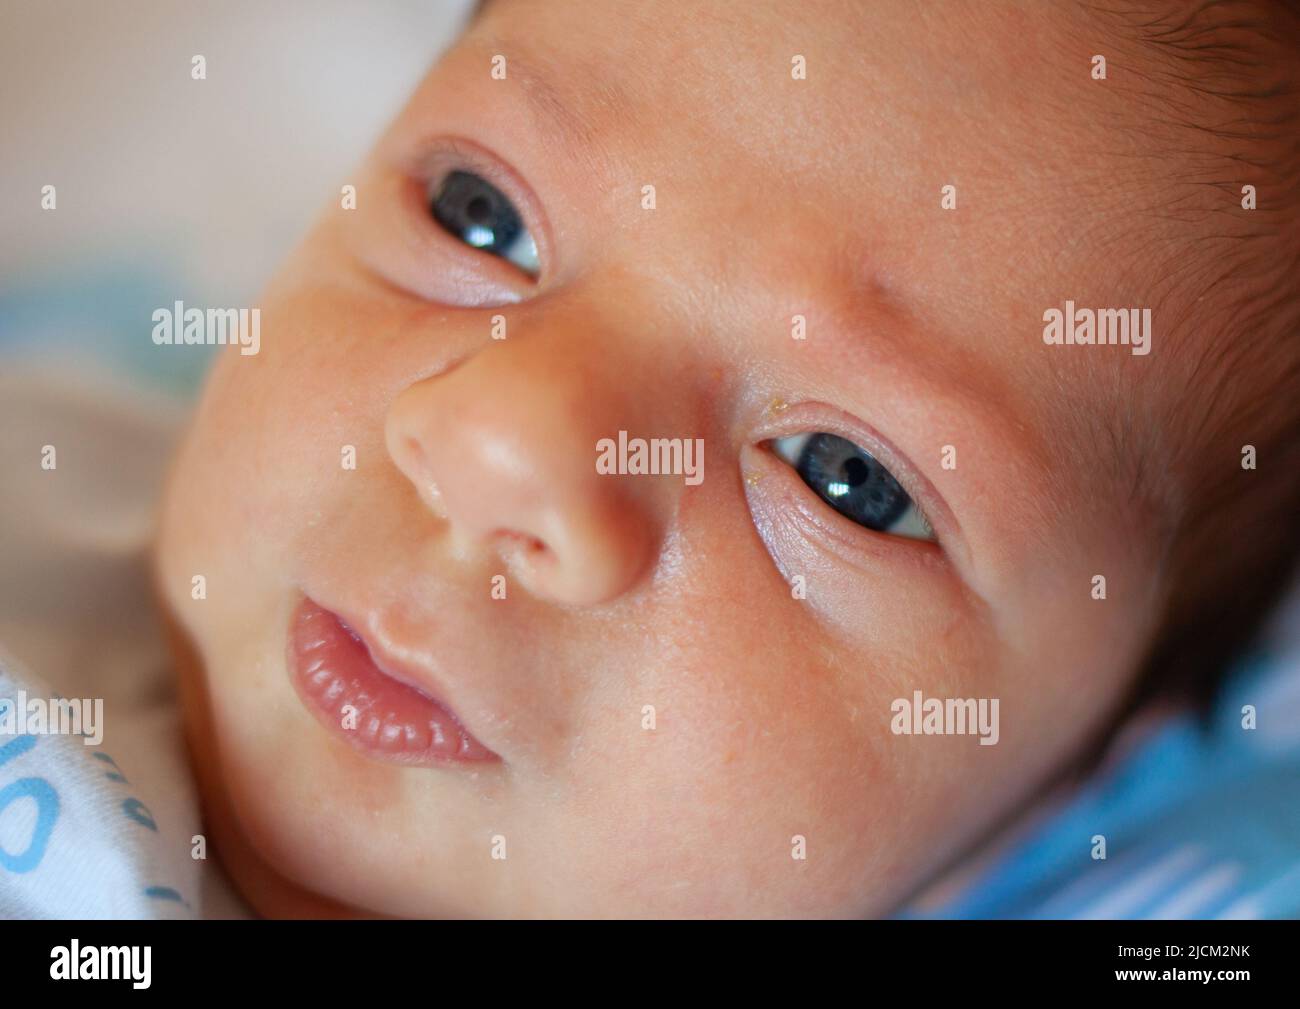 Detail of the eye of a newborn of a few days. Medical Concept Regarding the Eyesight of Pediatric Infants. Stock Photo